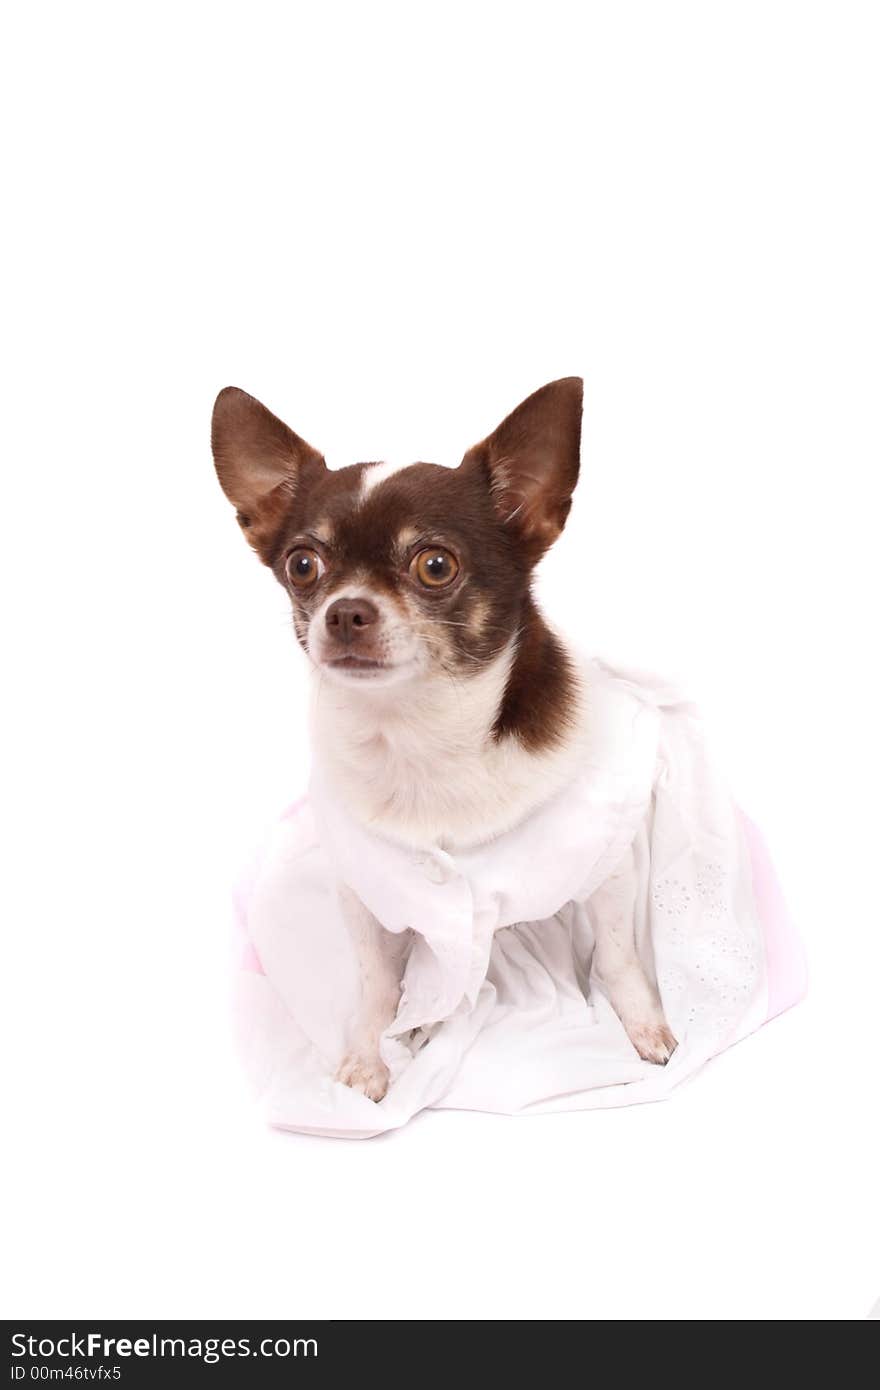 Chihuahua in the white clothes on the white background